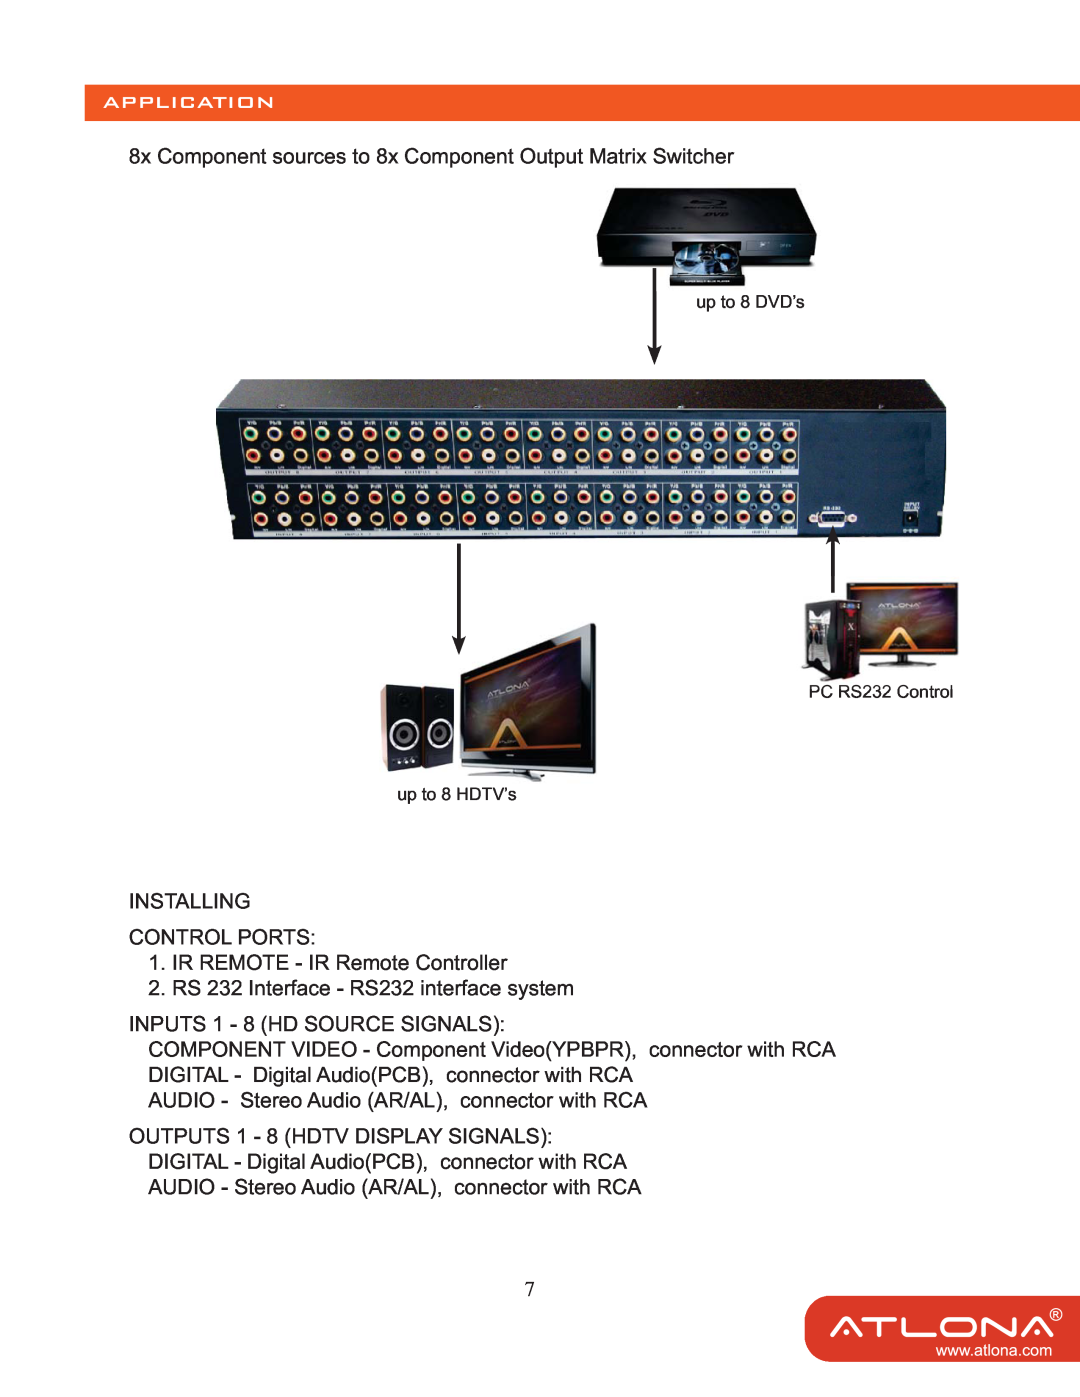 Atlona AT-COMP-88M user manual Application, up to 8 DVD’s PC RS232 Control up to 8 HDTV’s 